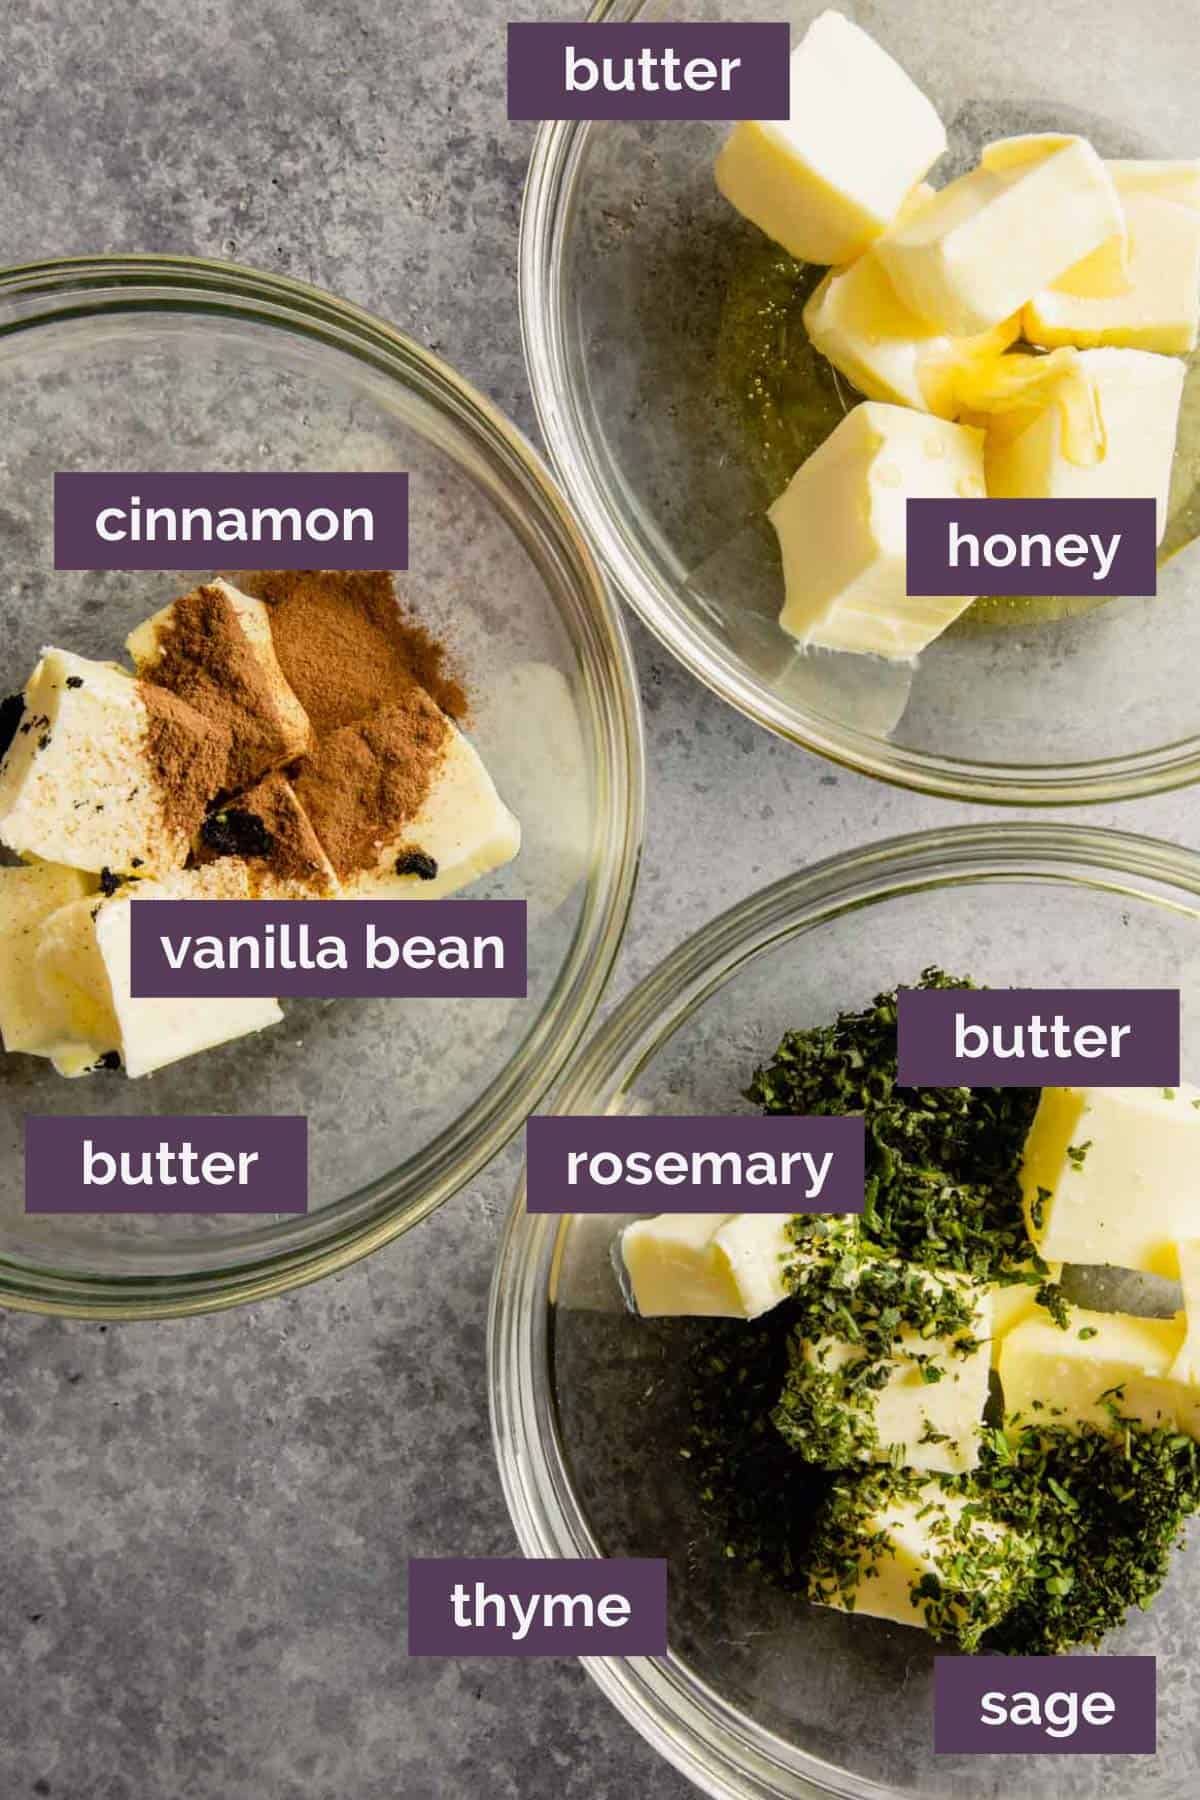 Three bowls with the ingredients for the three different compound butters.